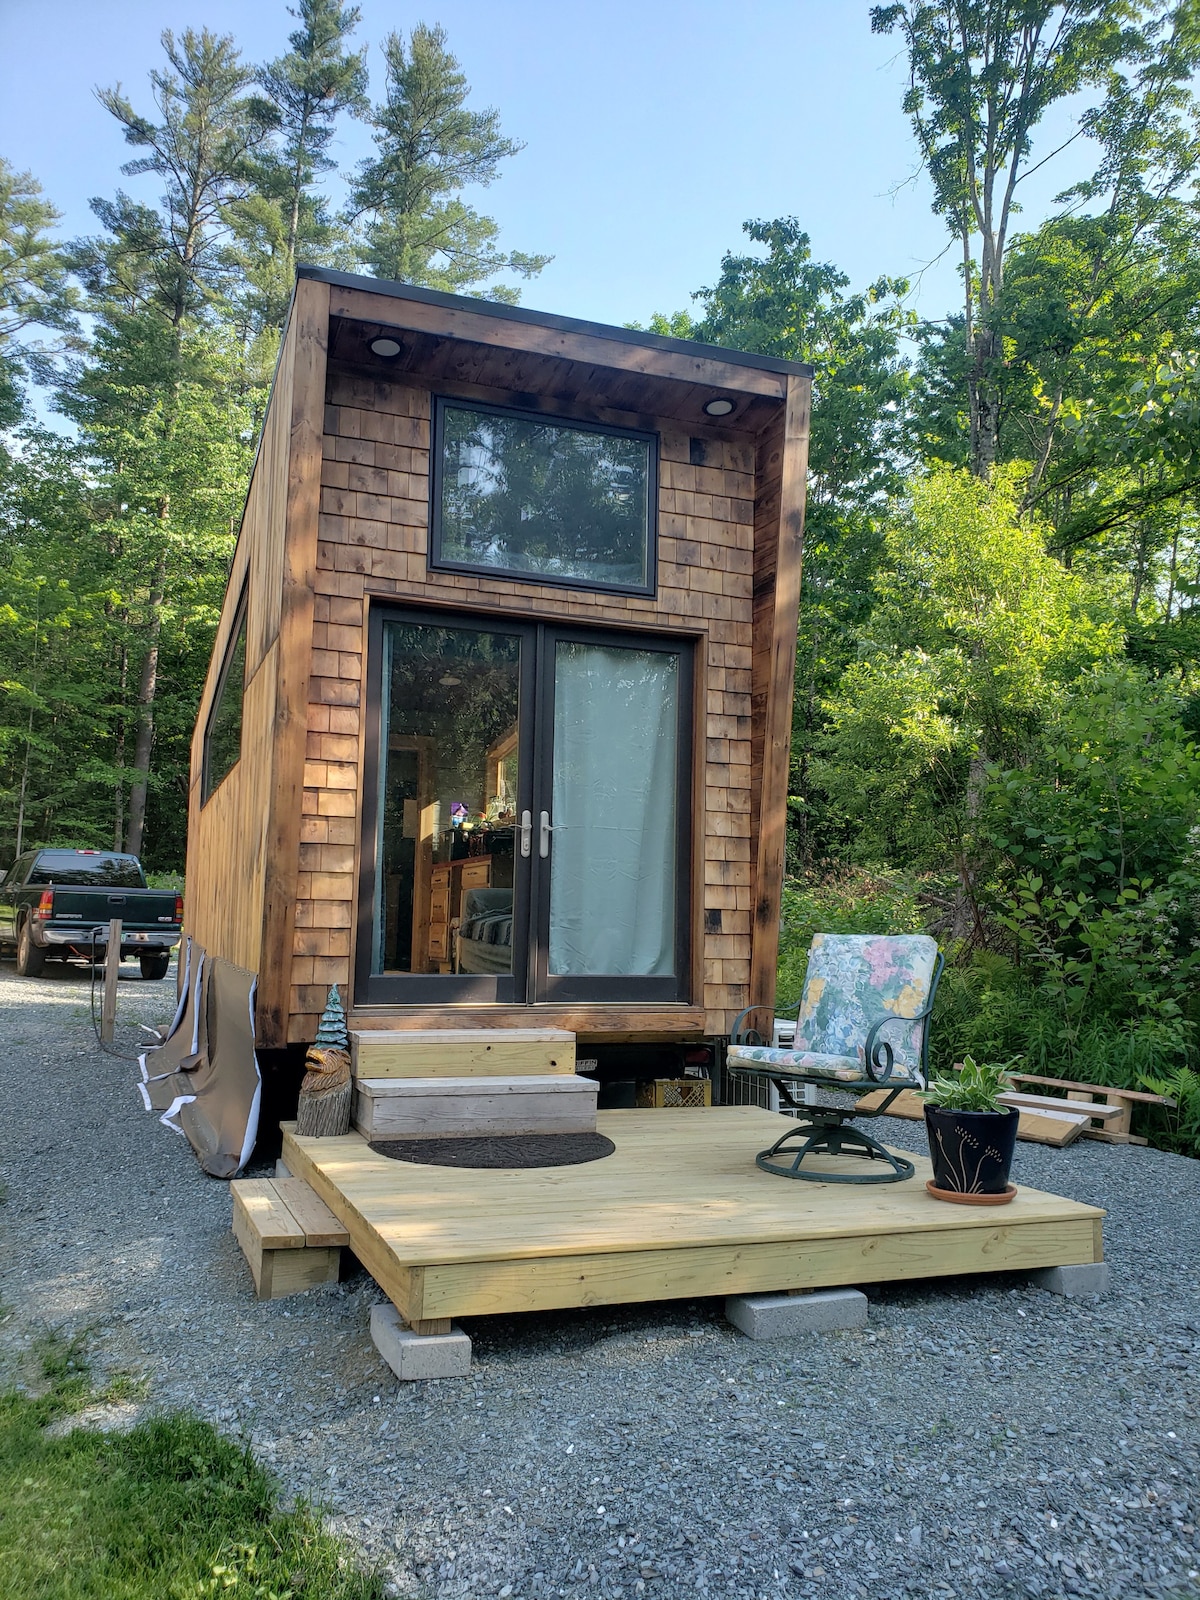 Secluded tiny house resort - DOG FRIENDLY